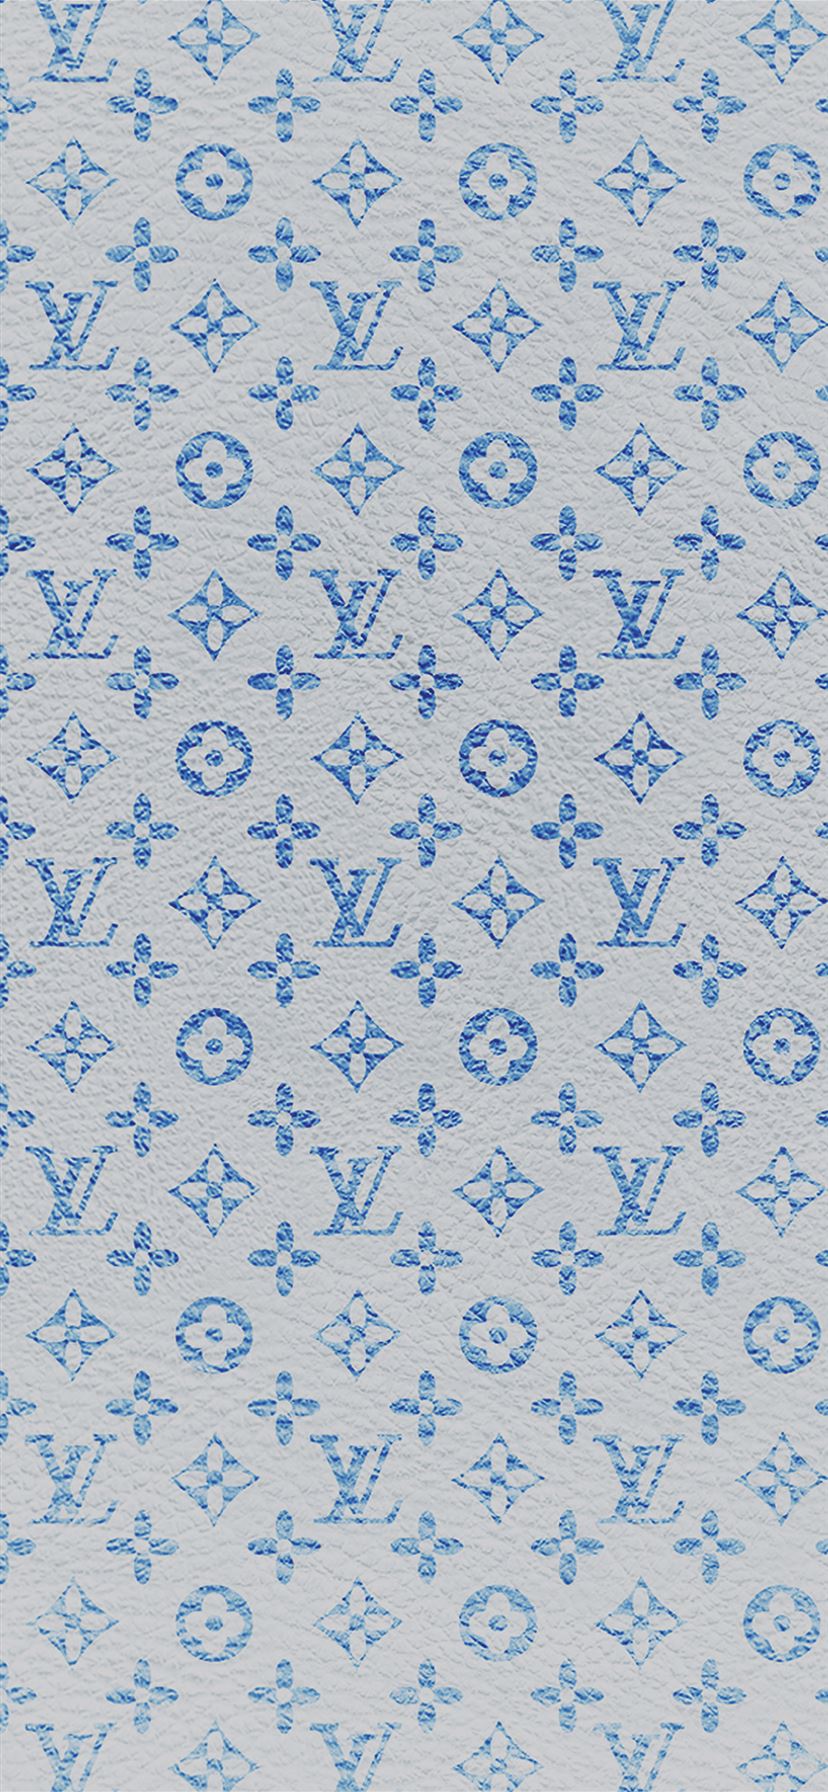 Iphone Louis Vuitton Wallpapers